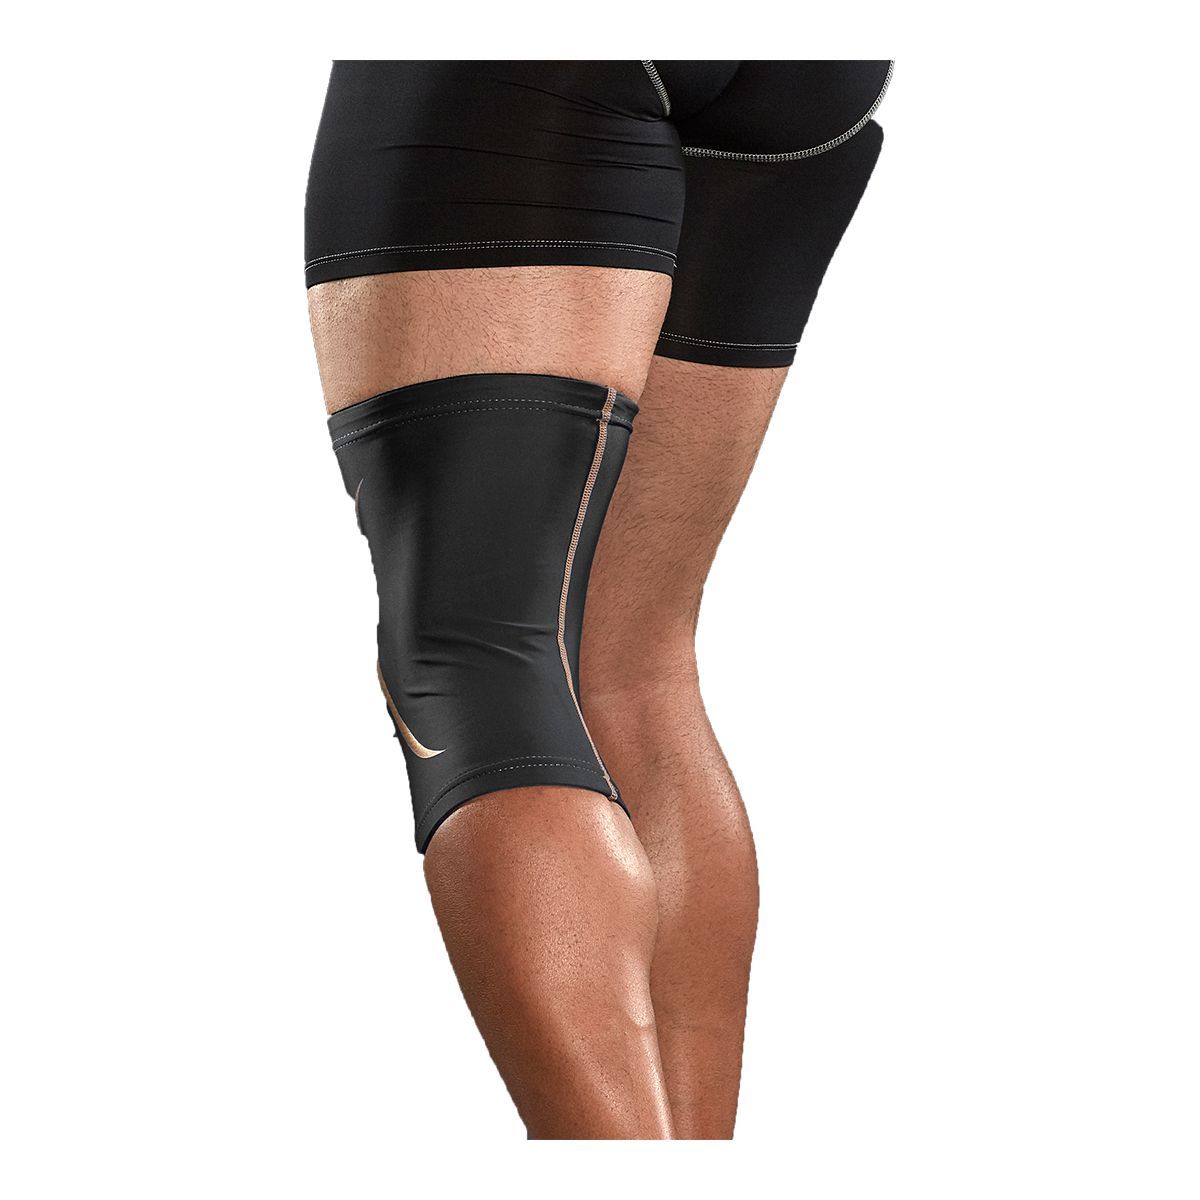 Tommie Copper Knee Compression Sleeve